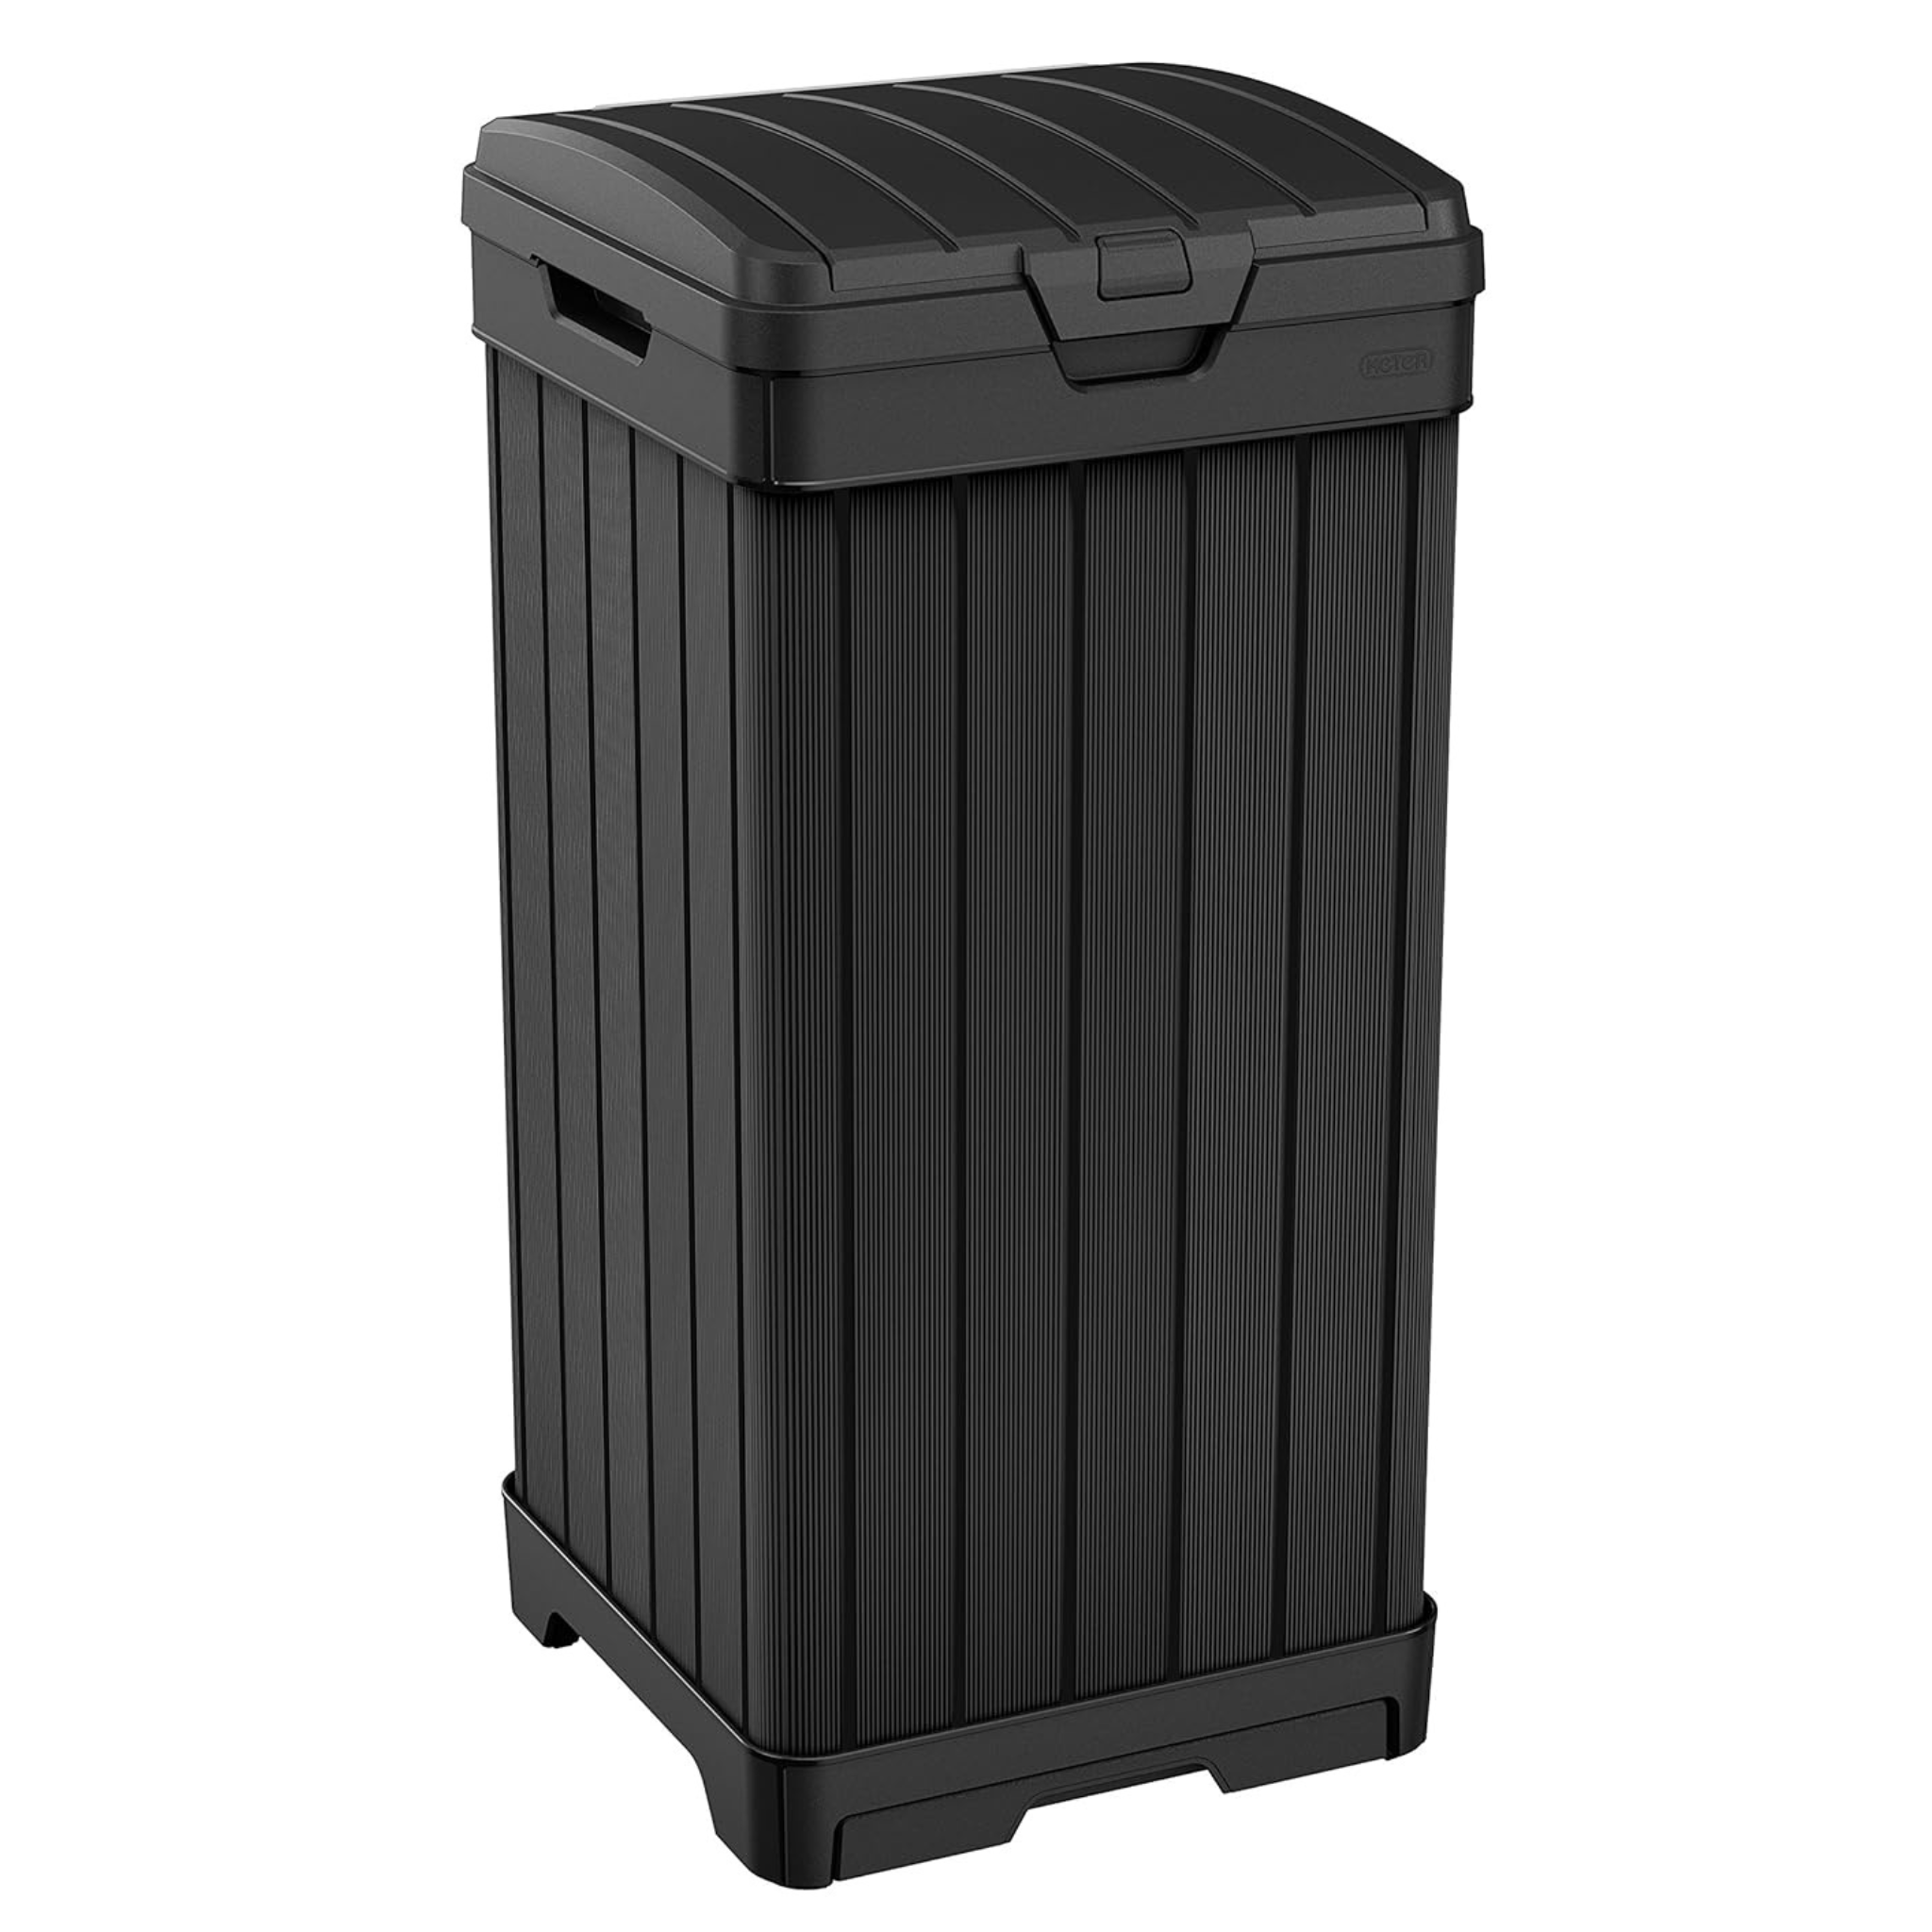 Keter Baltimore 38 Gallon Trash Can with Lid and Drip Tray